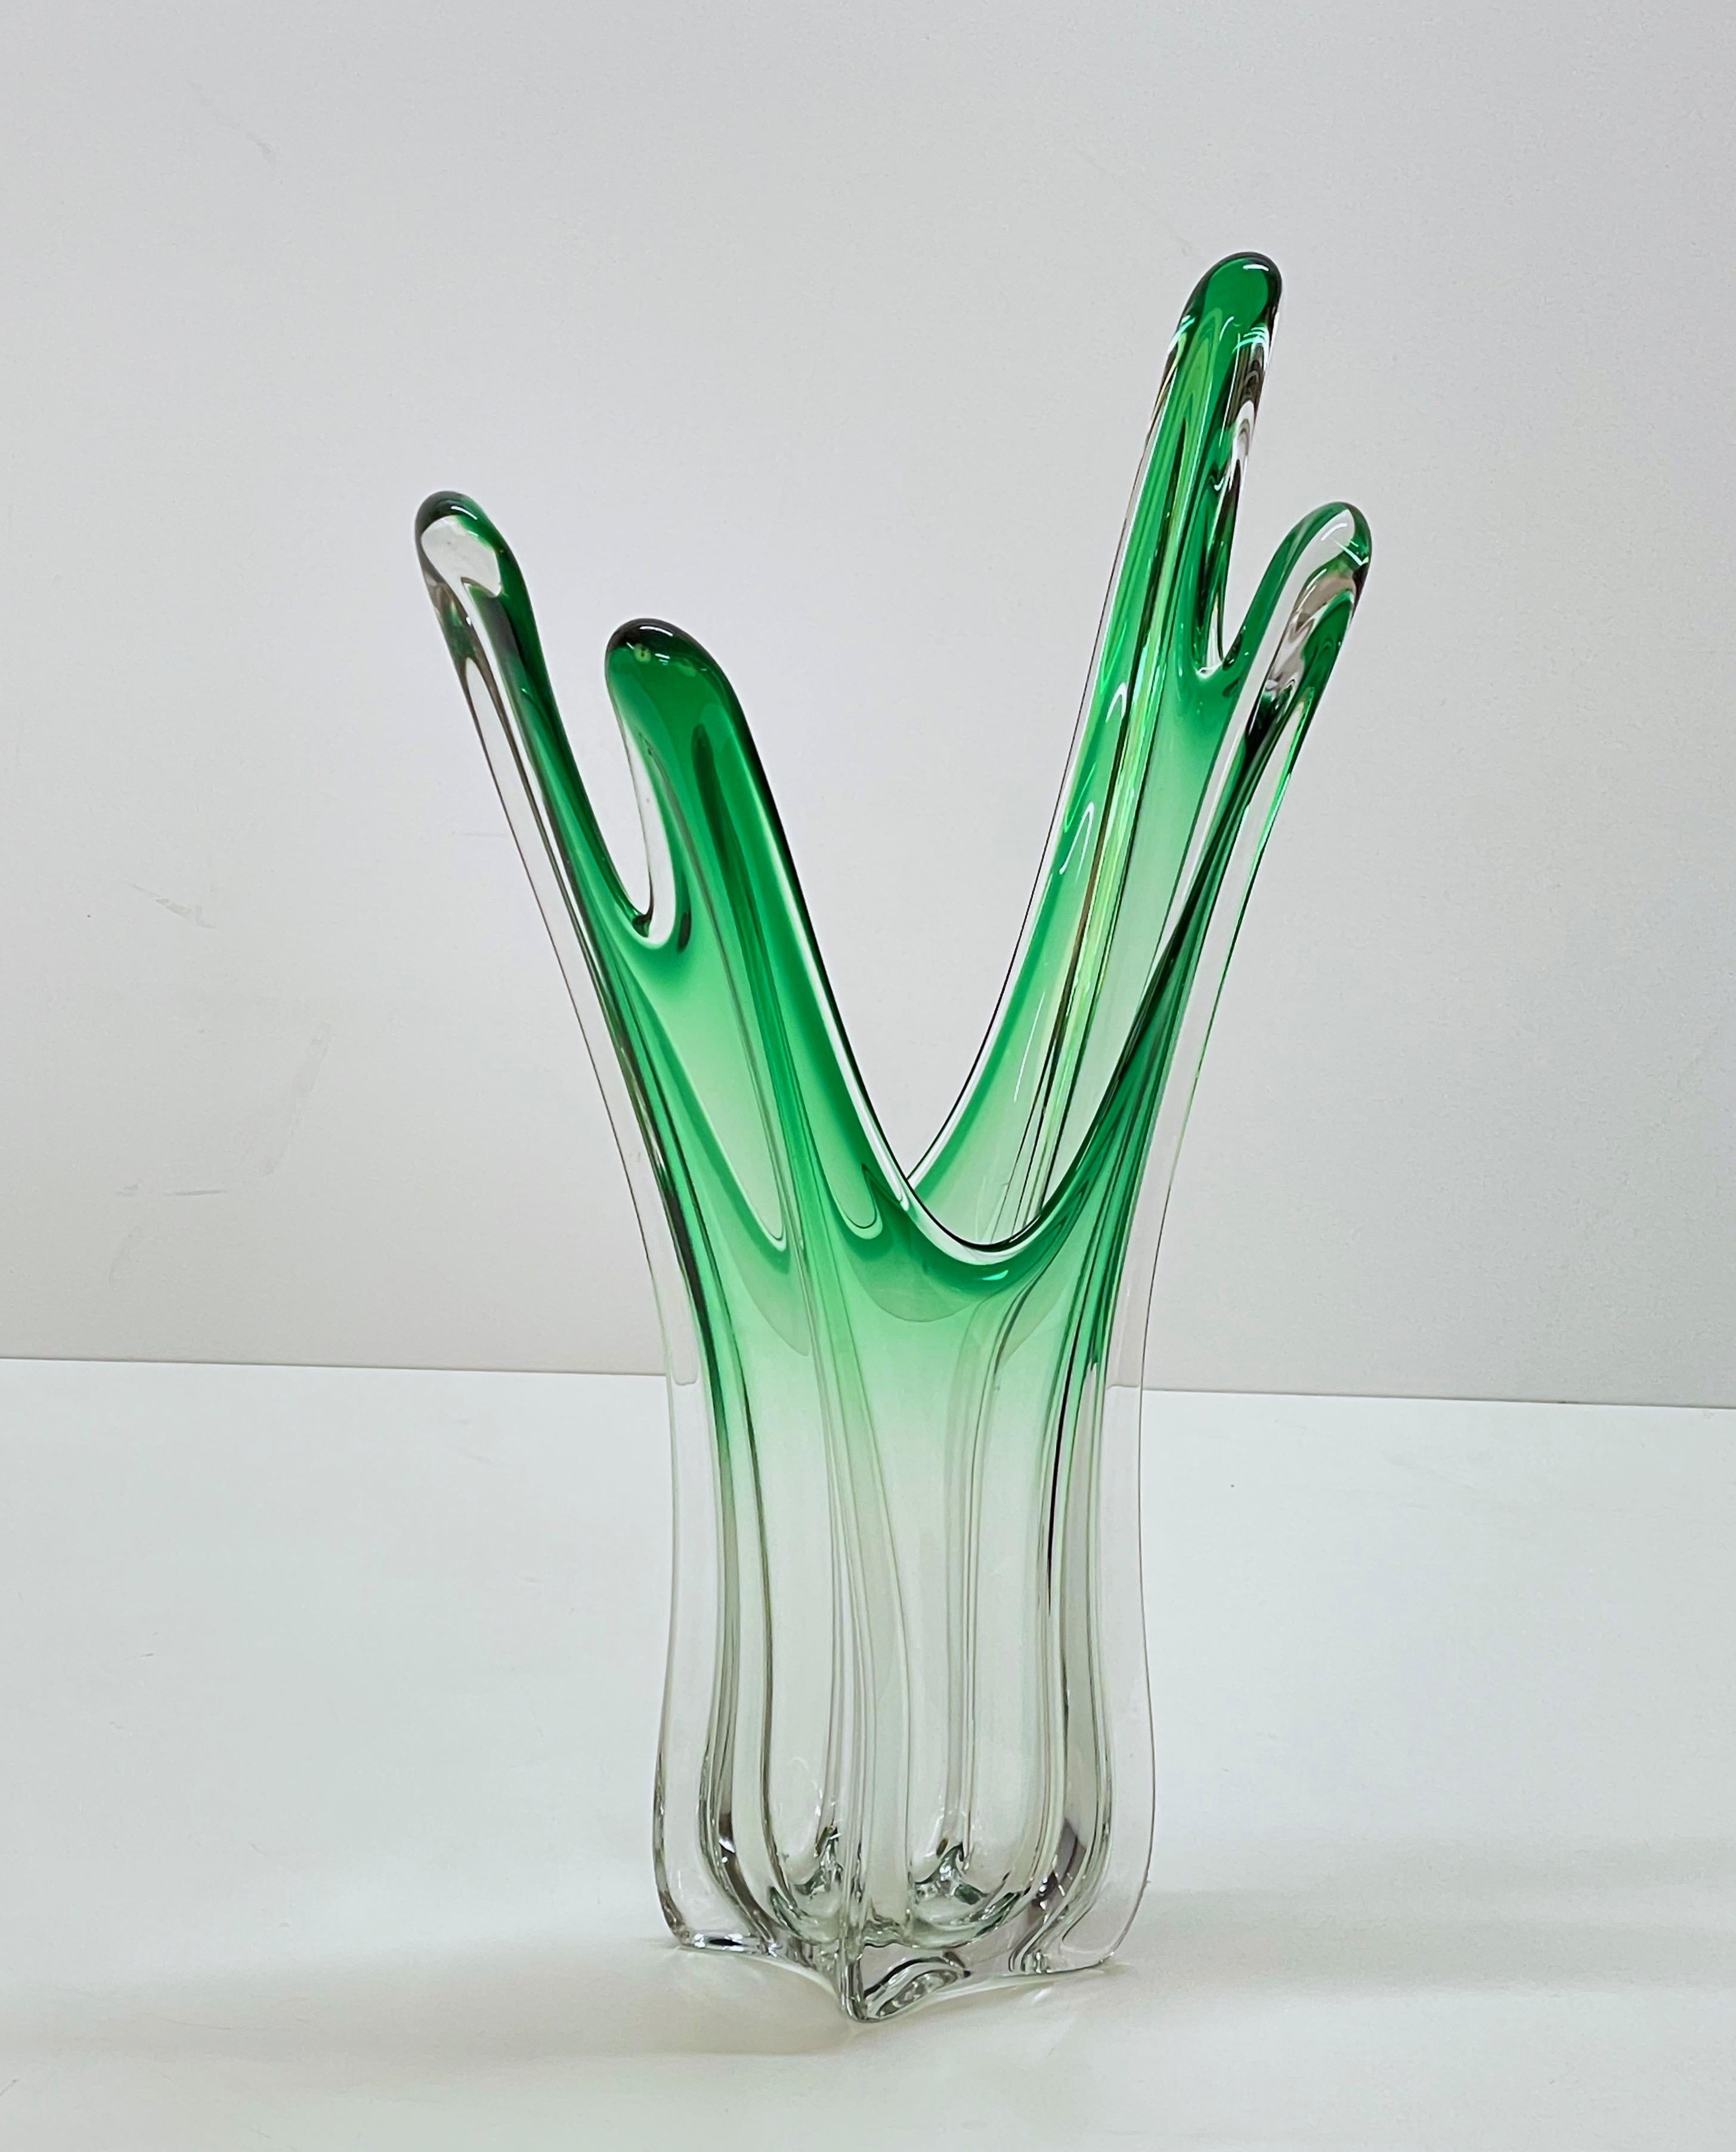 Midcentury Green Art Murano Glass Italian Vase Attributed to F.lli Toso, 1950s For Sale 7